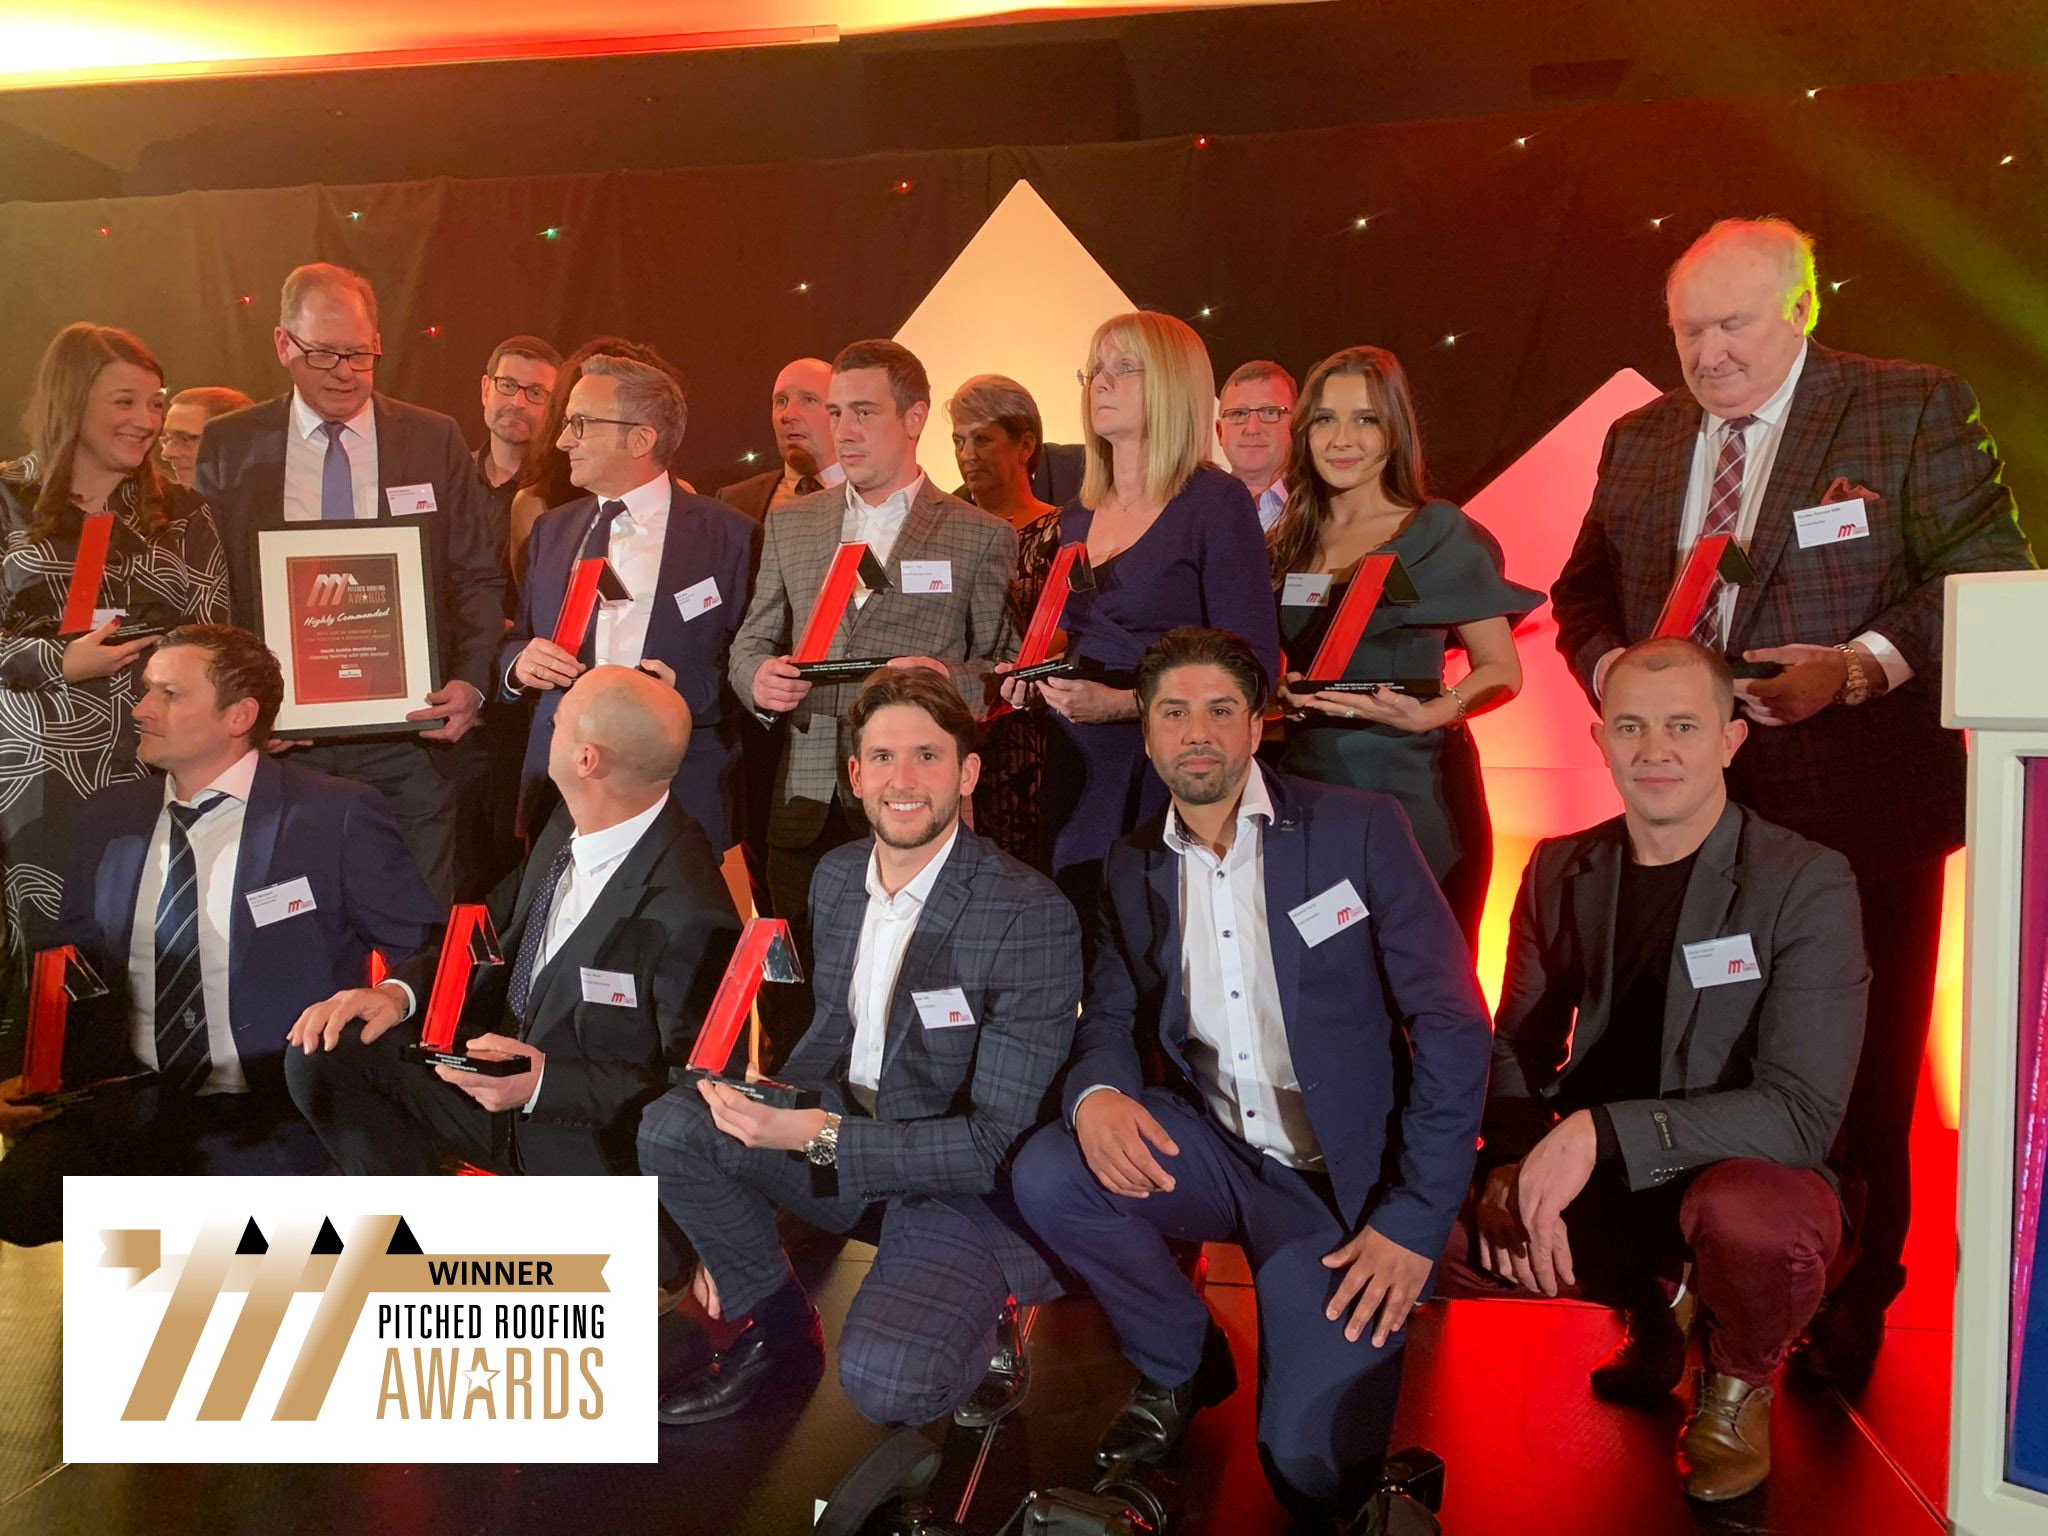 ELC Roofing Wins award 𝘽𝙚𝙨𝙩 𝙪𝙨𝙚 𝙤𝙛 𝙨𝙡𝙖𝙩𝙚 𝙛𝙤𝙧 𝙖 𝙙𝙤𝙢𝙚𝙨𝙩𝙞𝙘 𝙥𝙧𝙤𝙟𝙚𝙘𝙩 in England